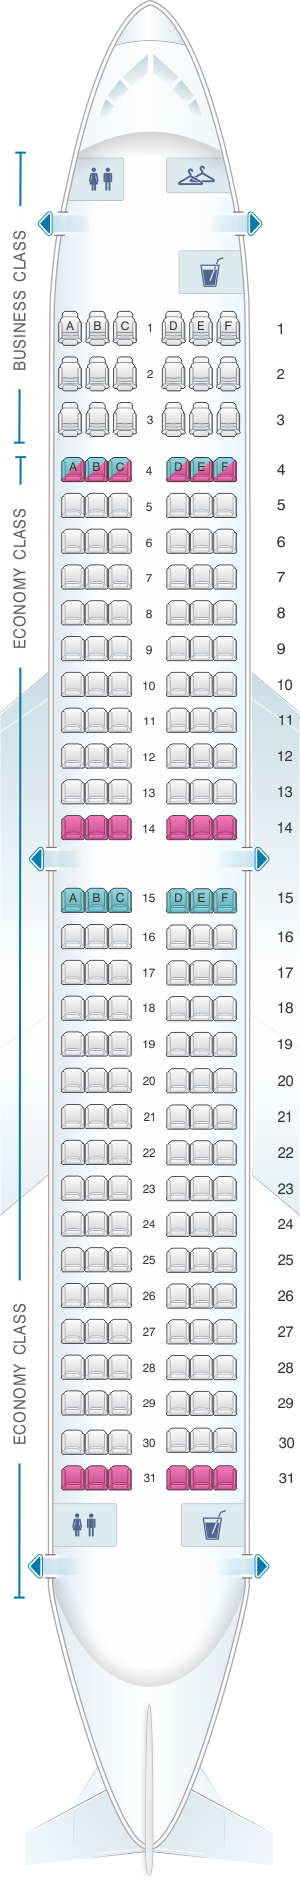 Seat map for Air Europa Boeing B737 800